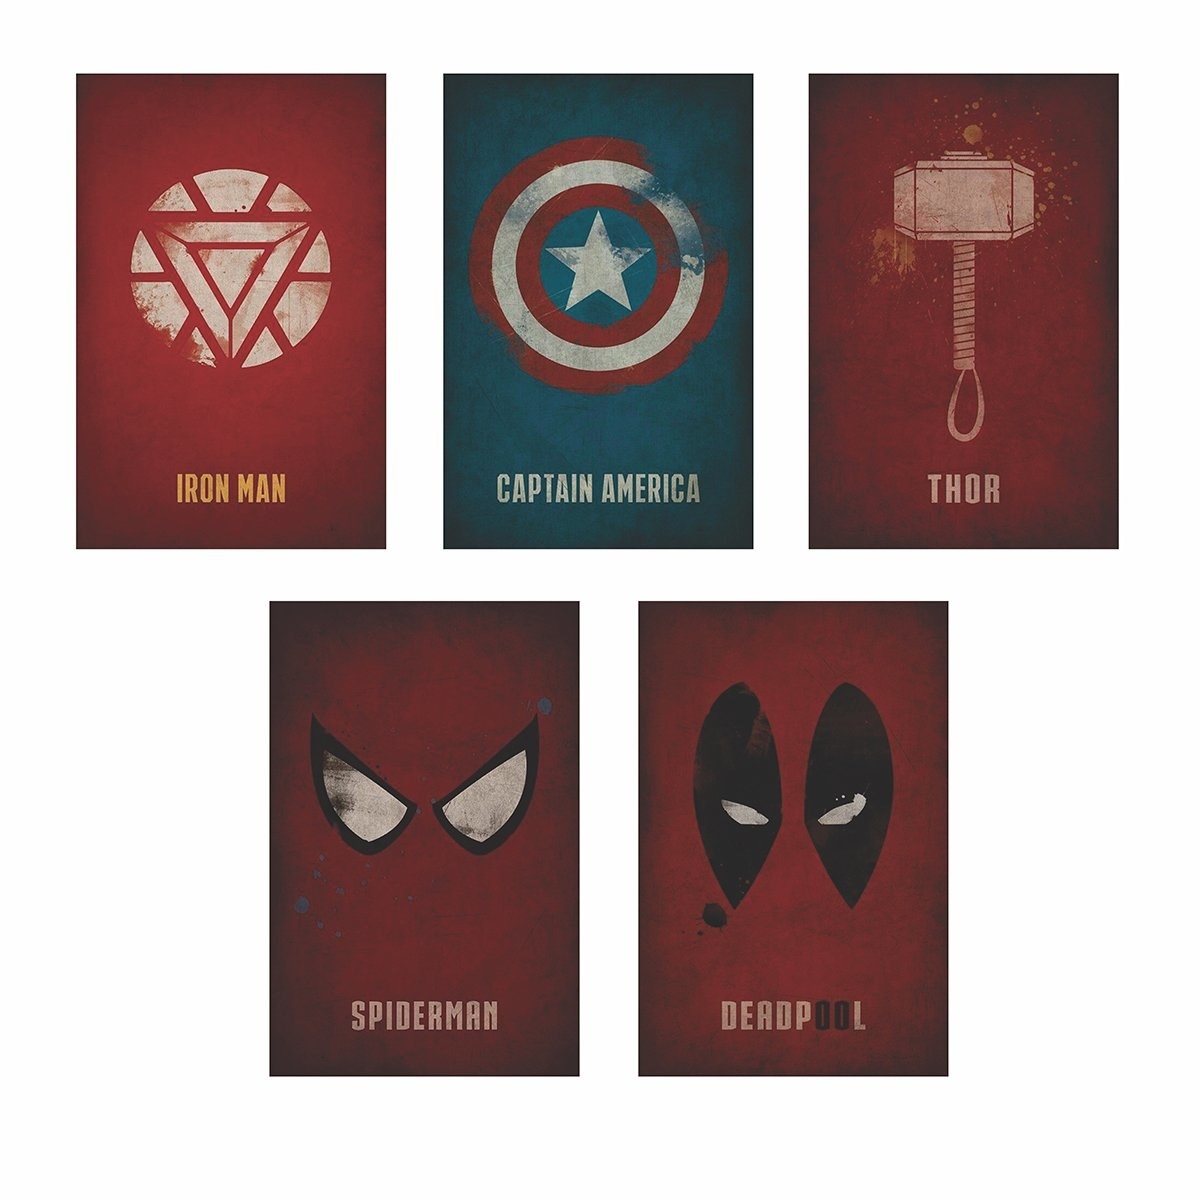 Five posters with iconic symbols for Iron Man, Captain America, Thor, Spiderman and Deadpool.